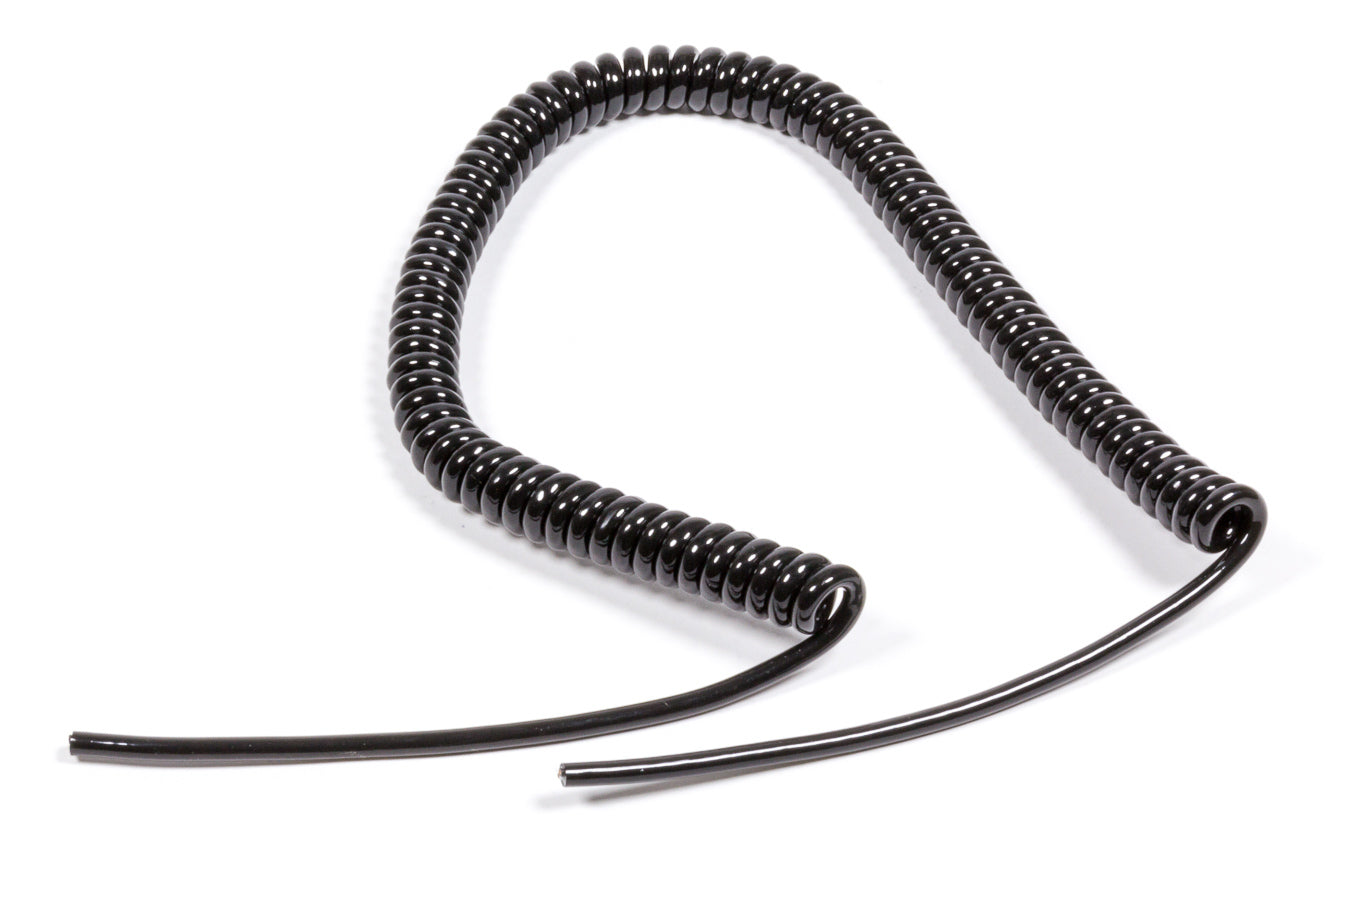 Biondo Racing Products 2-Lead 6ft Stretch Cord Black BRPSCB